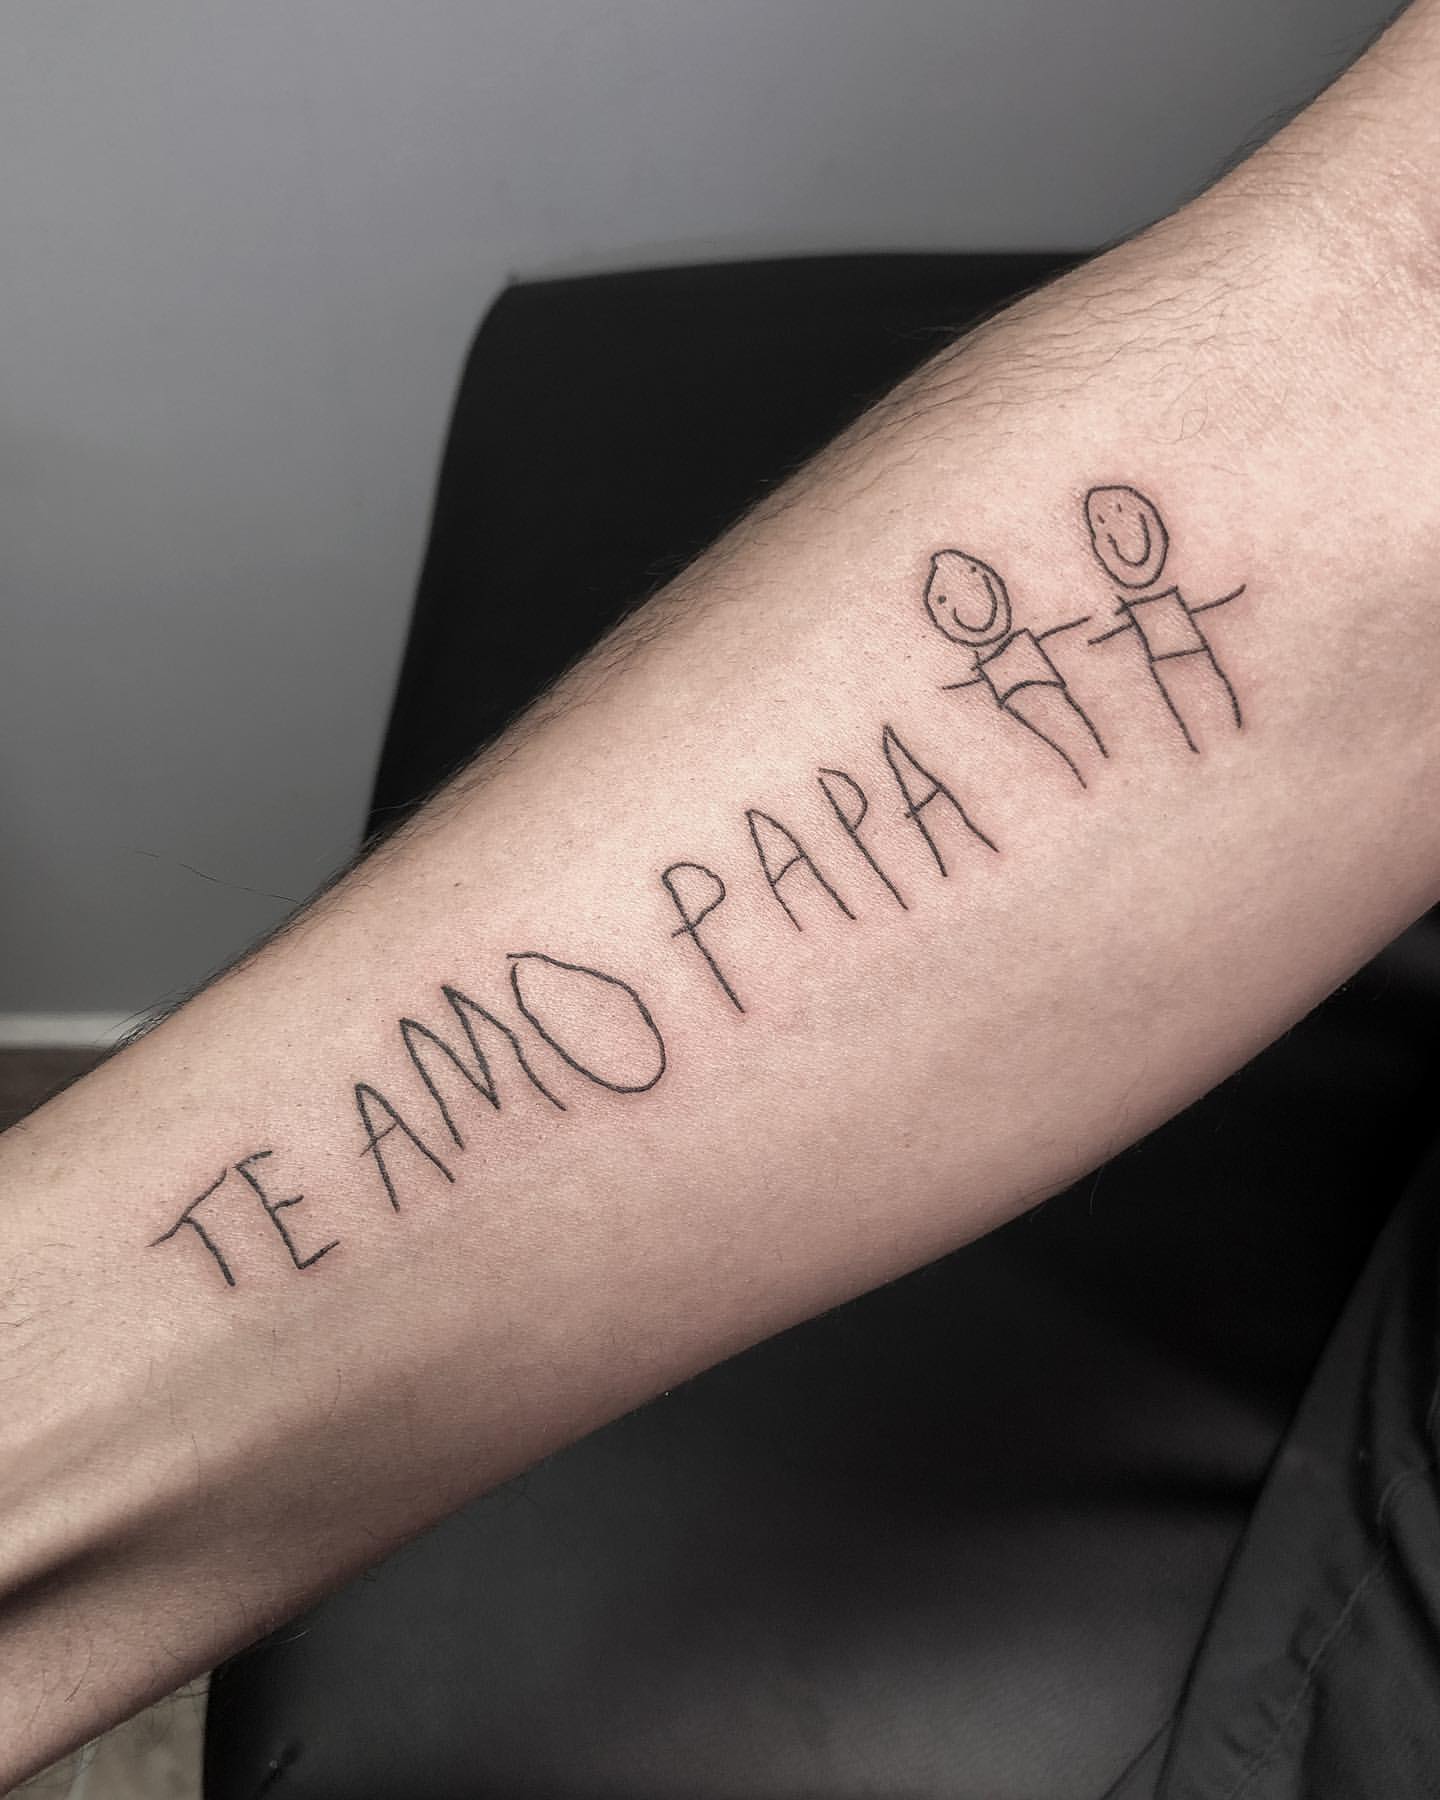 Family loyalty respect | Loyalty tattoo, Respect tattoo, Tattoos for guys